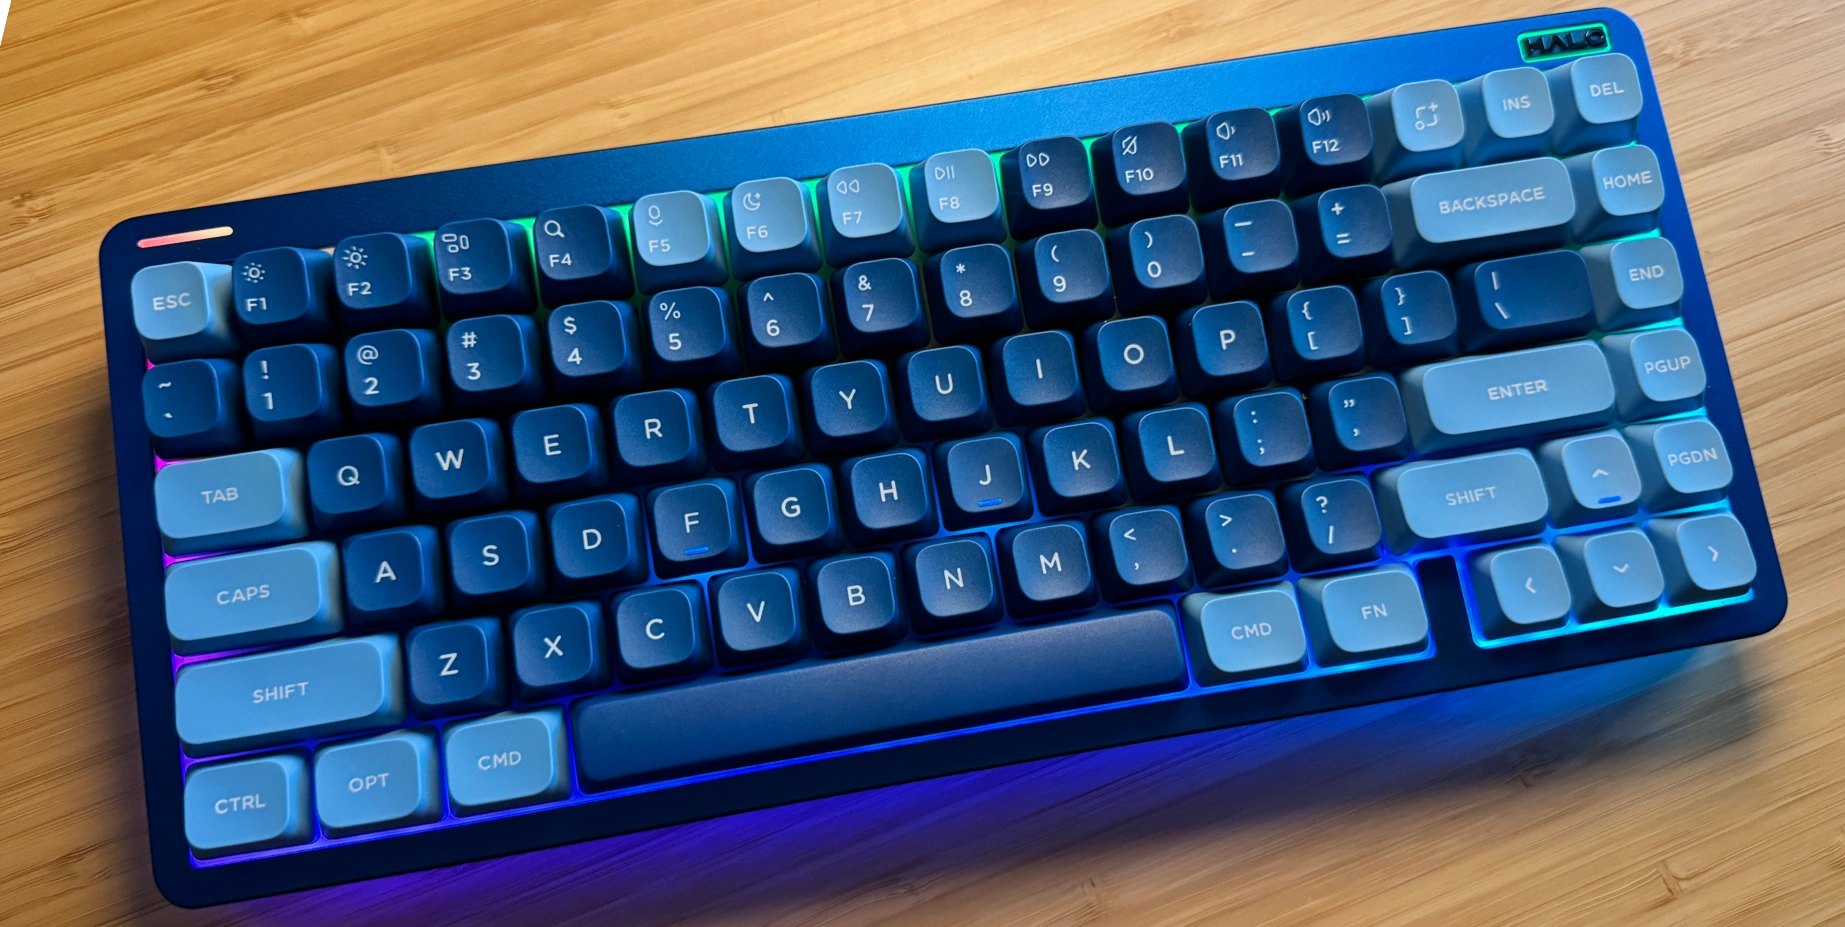 Review: NuPhy Halo75 V2 mechanical keyboard is a light show of fun for your  Mac - 9to5Mac